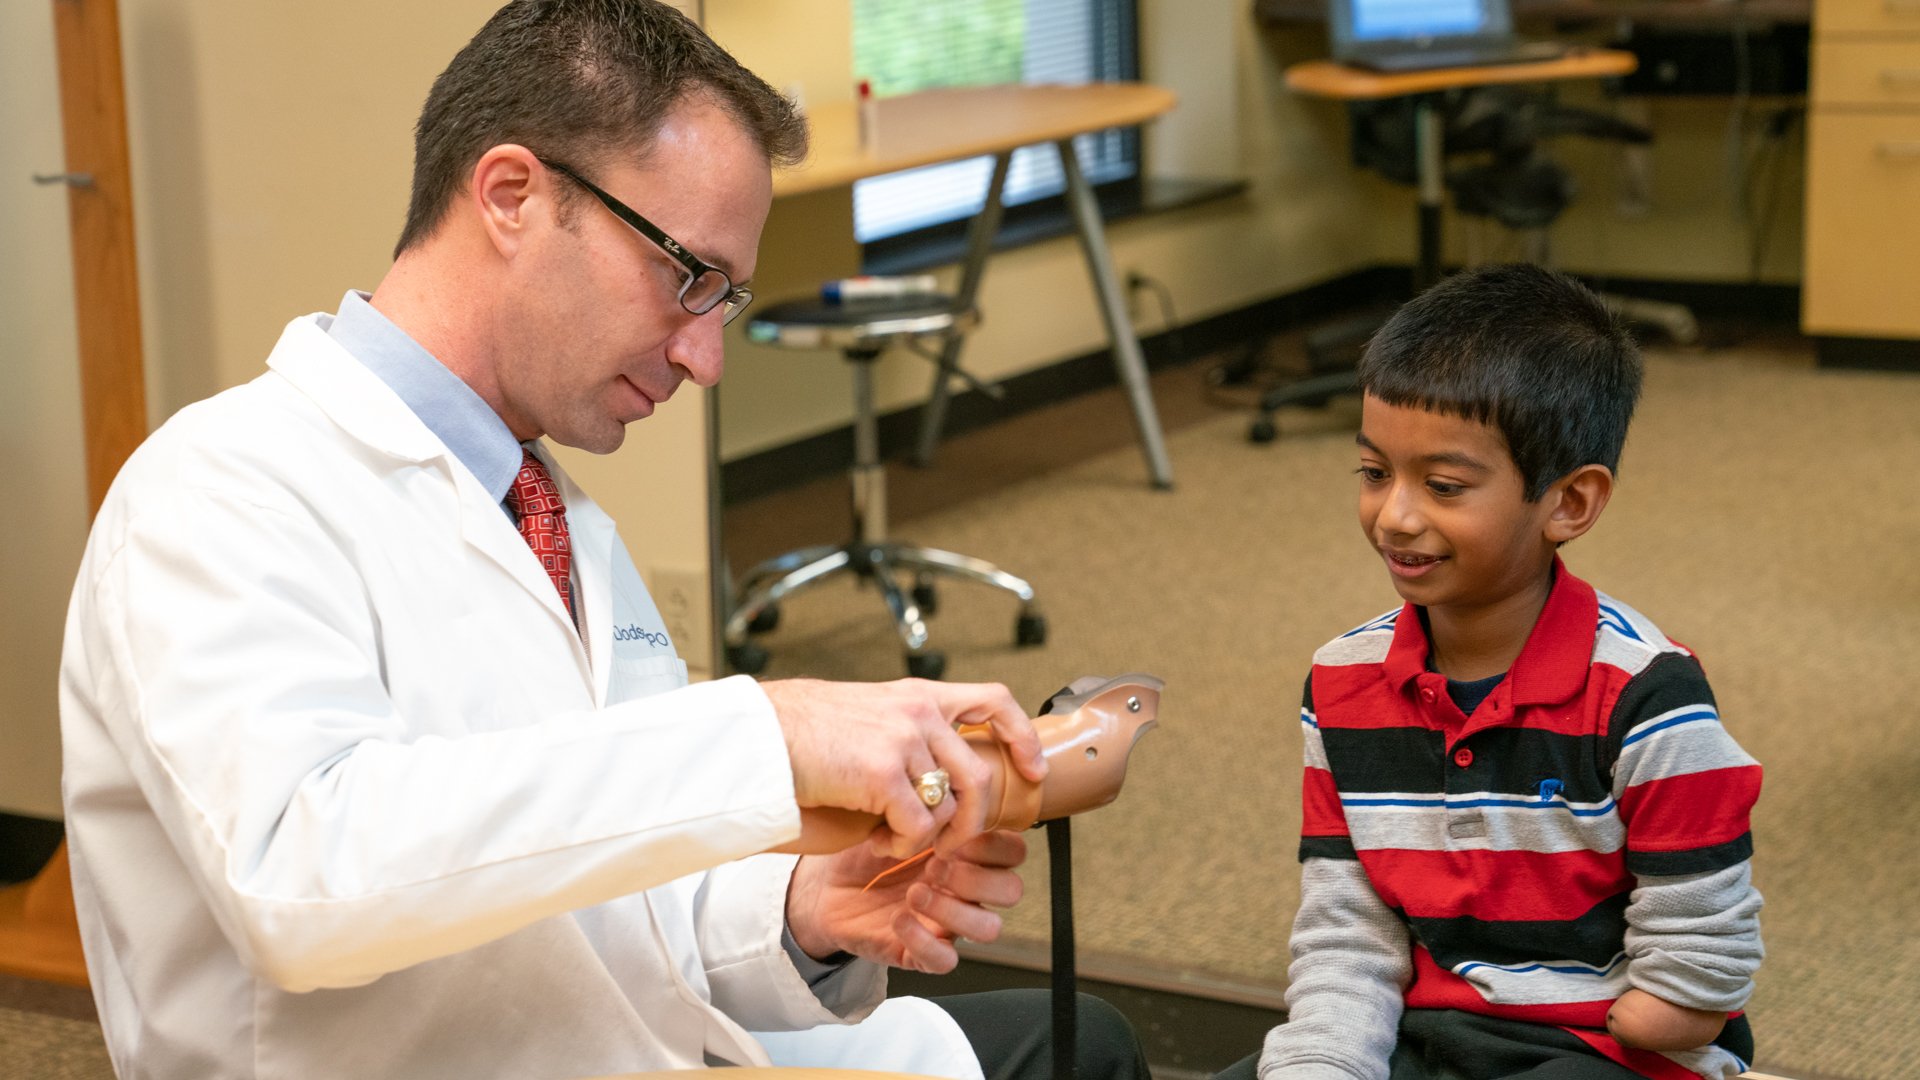 Prosthetist Rob Dodson, CPO, FAAOP, fitting a pediatric patient